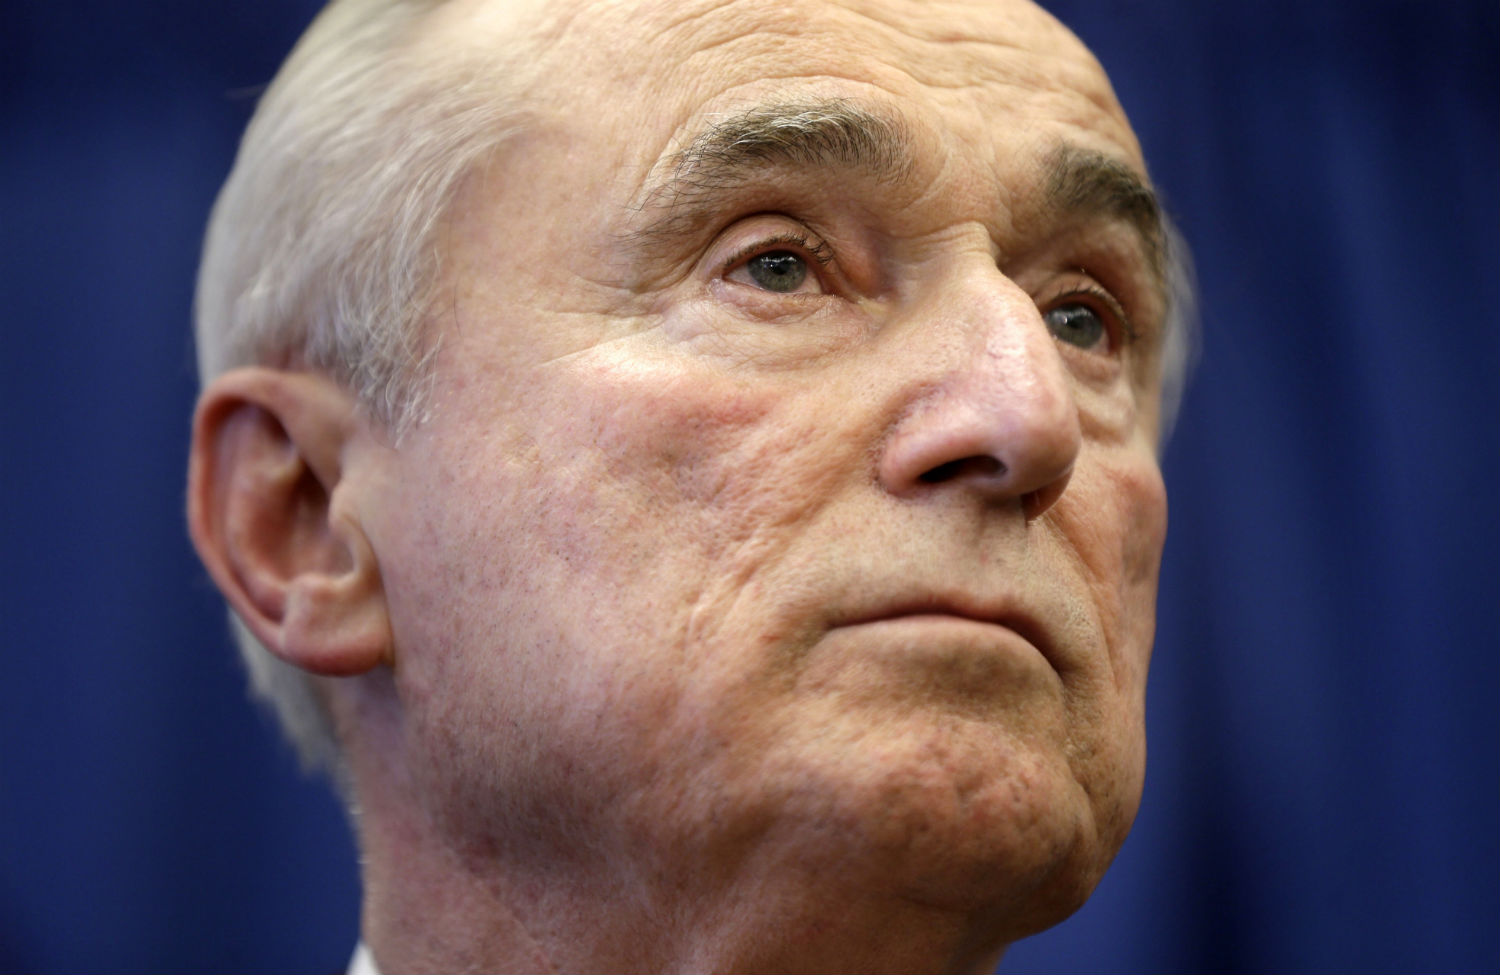 Surprise! NYPD Commissioner Bratton Doesn’t Think Race Had Anything to Do With Eric Garner’s Death